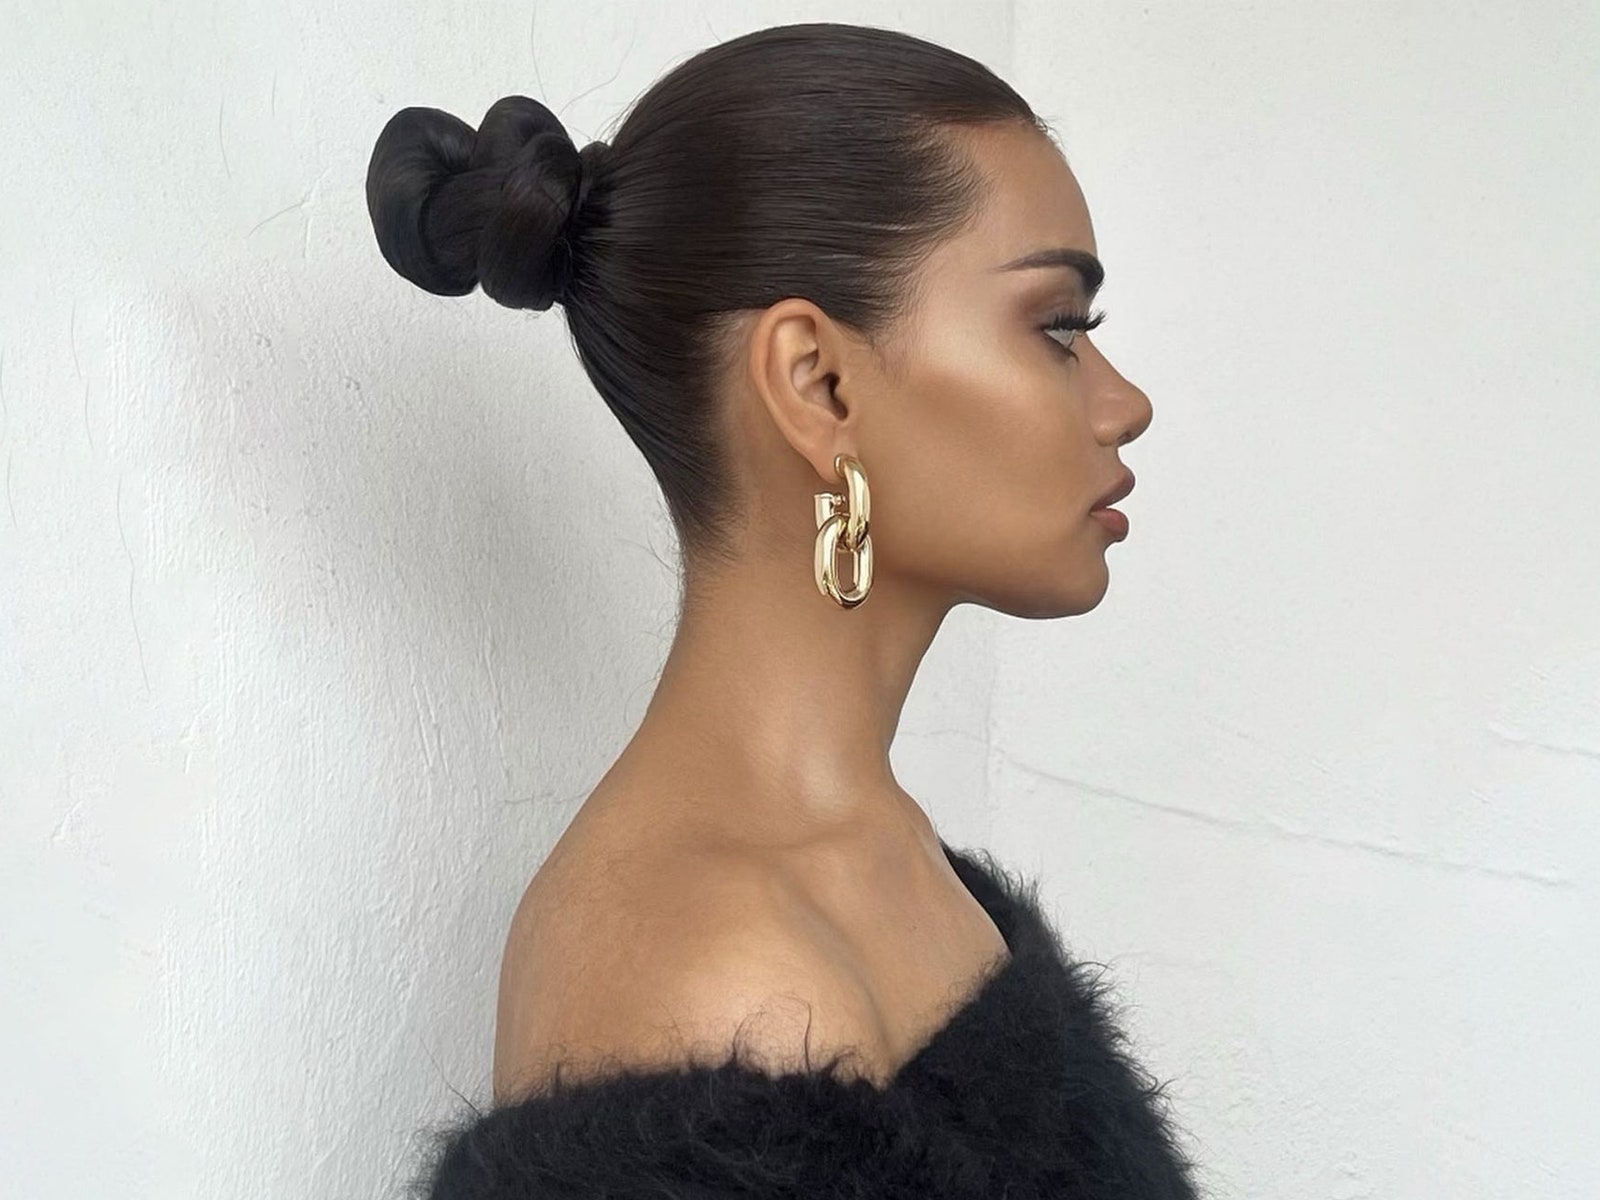 These stunning updo hairstyles are anything but boring